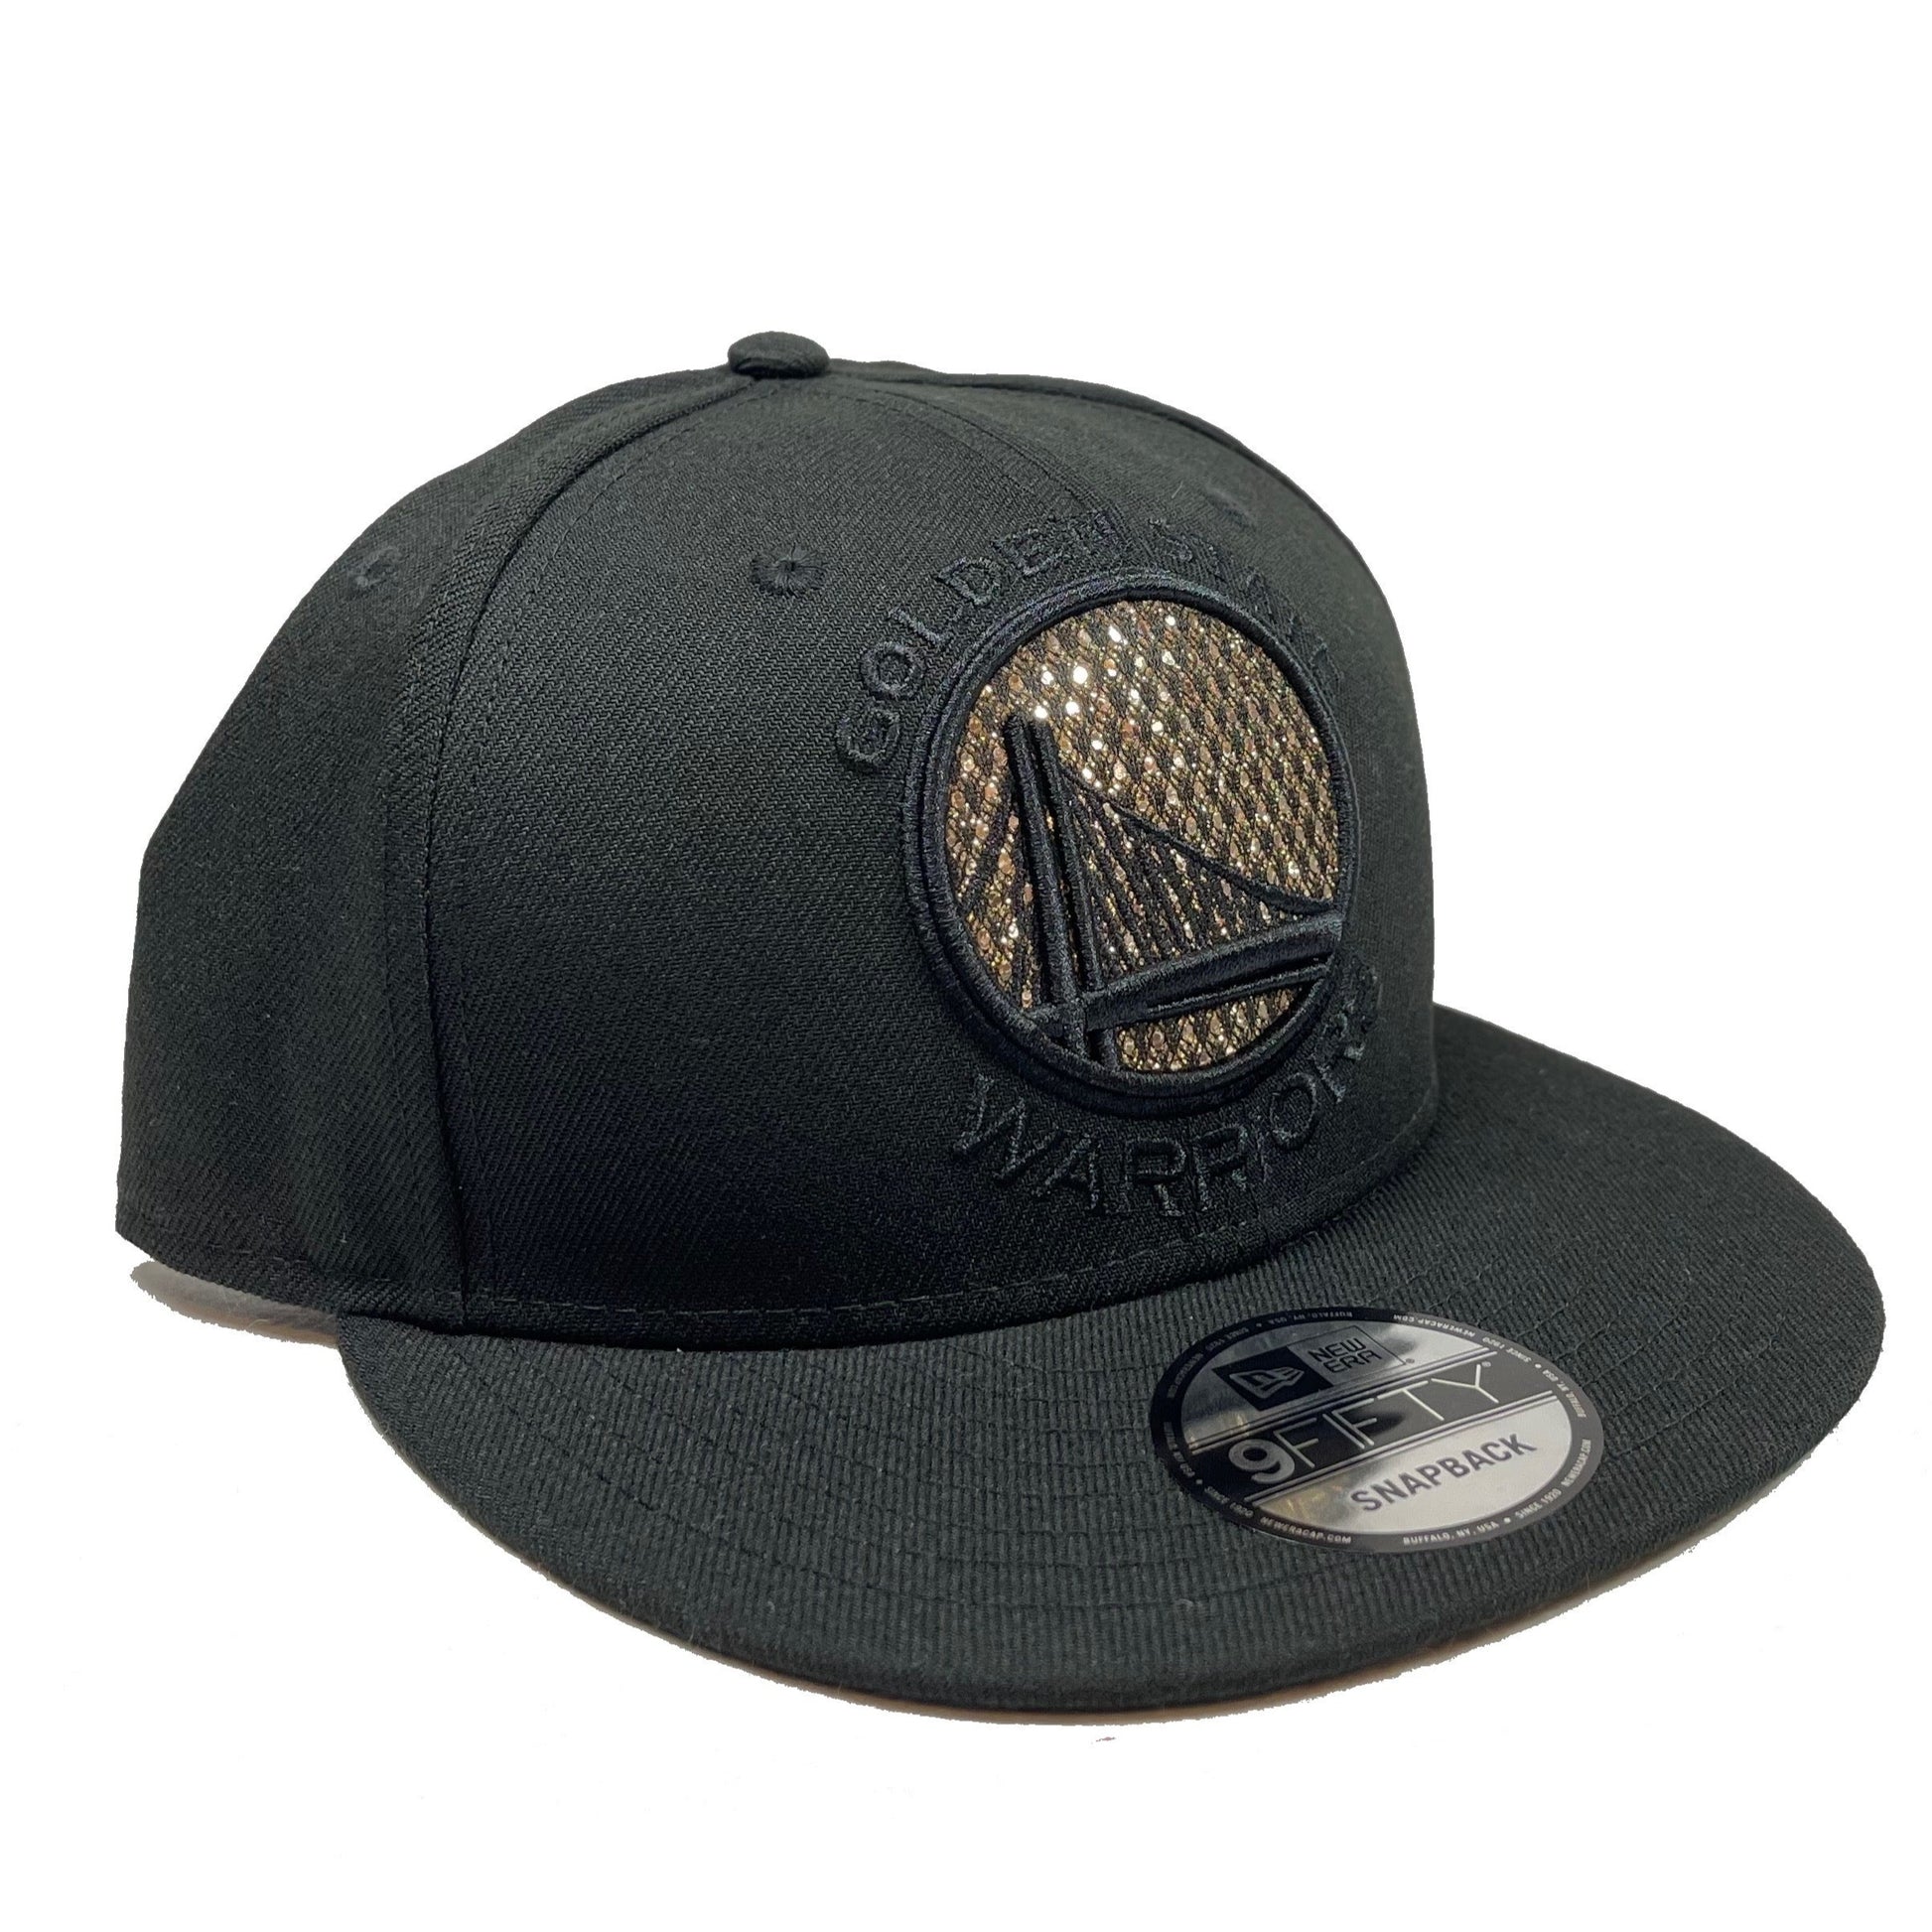 Golden State Embroidered Snapback Trucker Cap